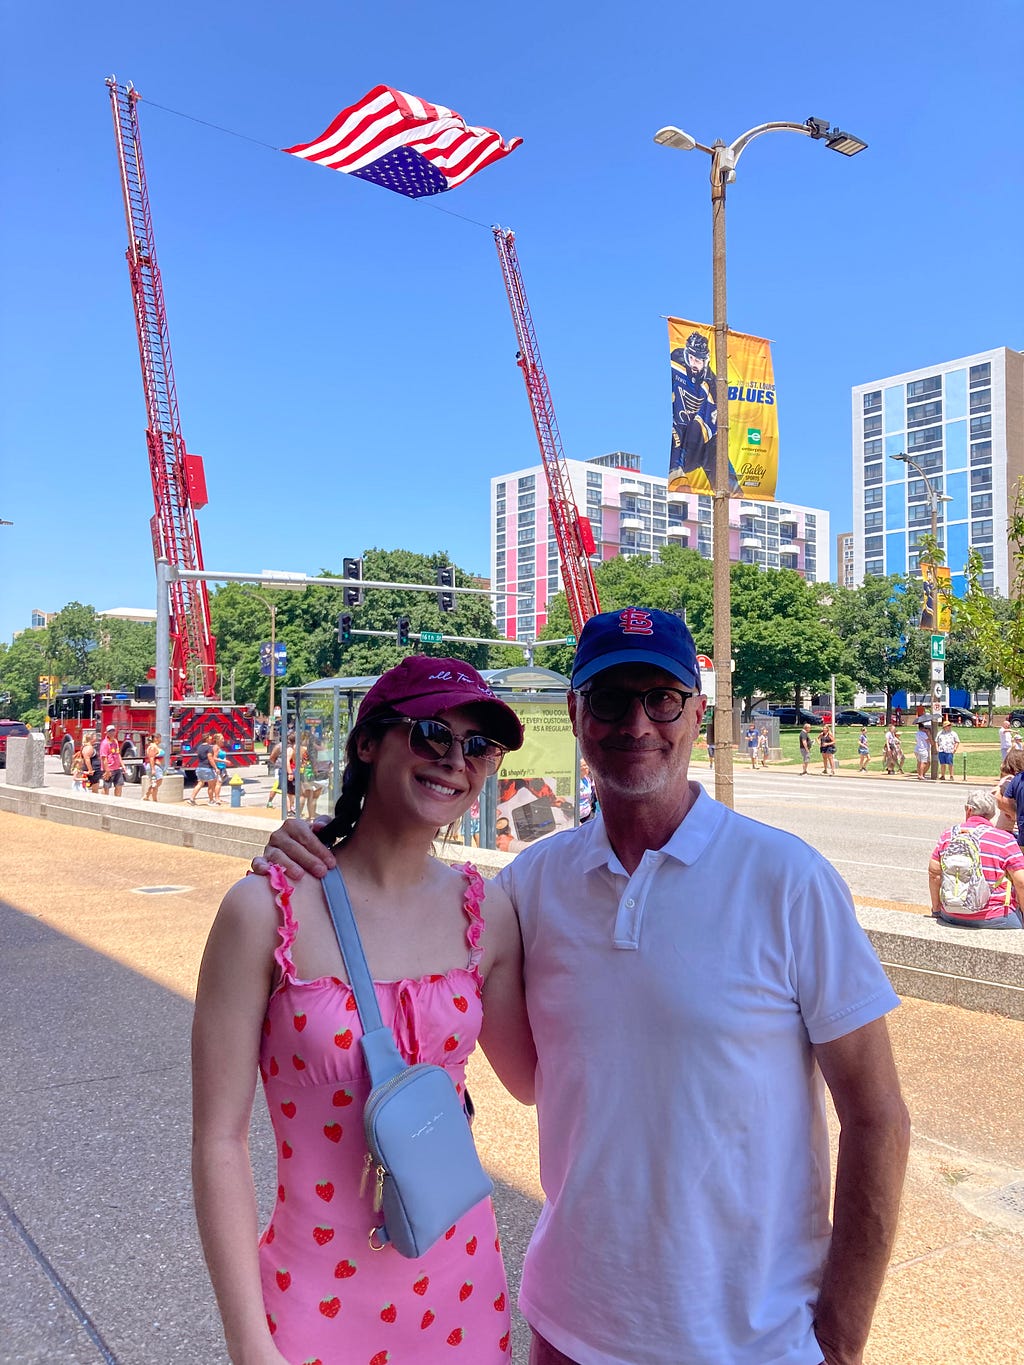 Colorful photo of the writer with his younger daughter at Pride parade with American flag flying, between extended ladders of two fire trucks, in a blue sky behind them. Photo credit is to “a fellow citizen.”